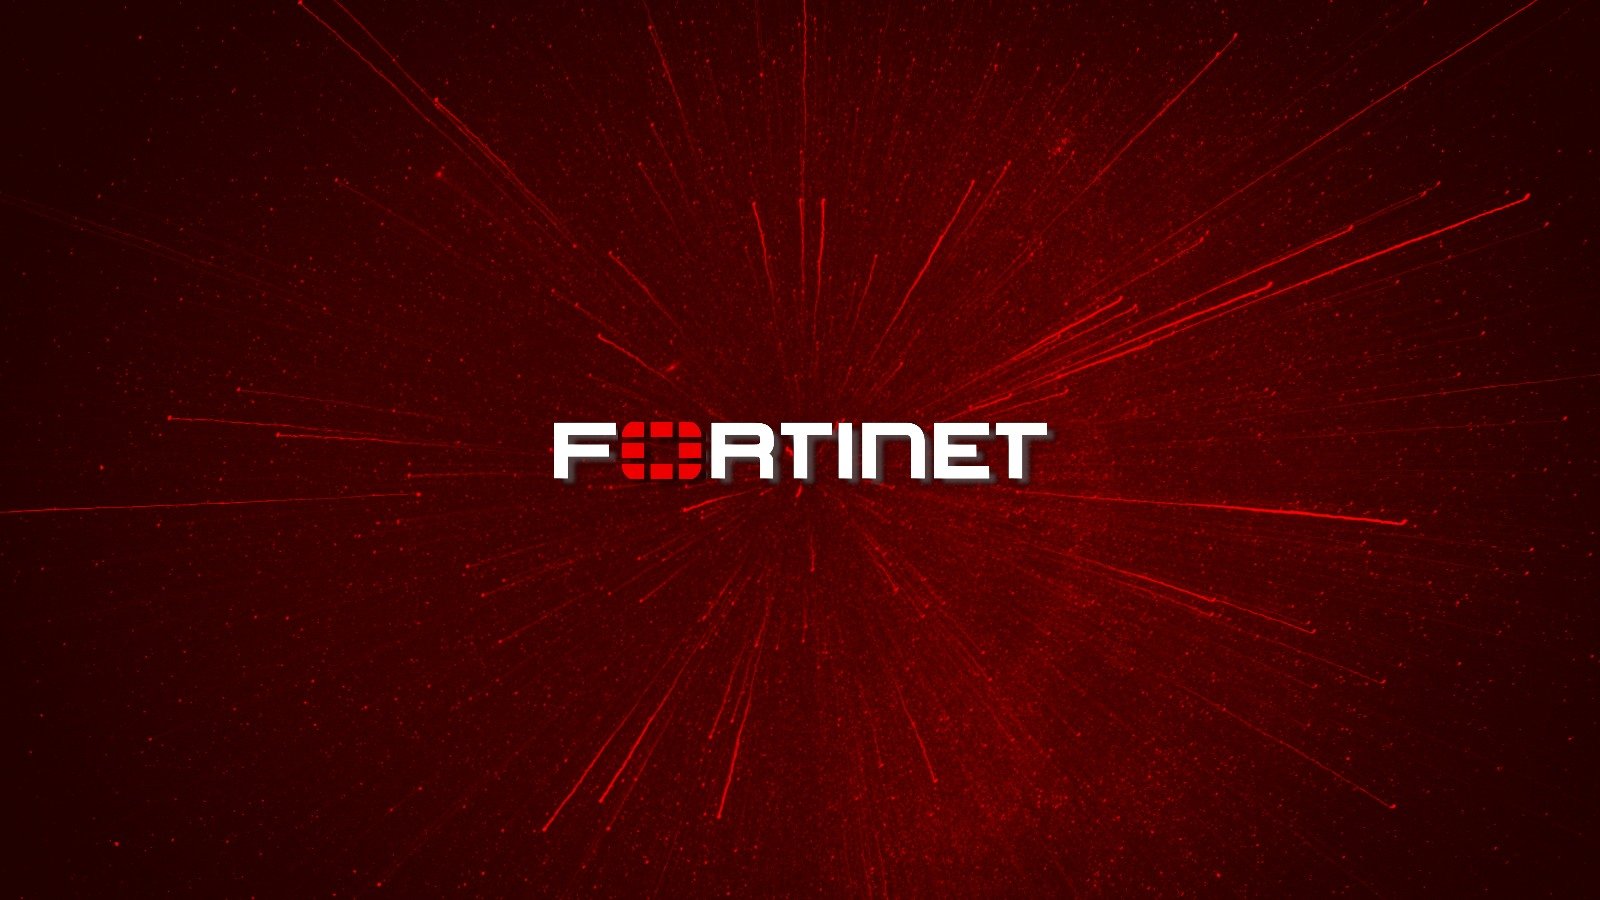 new-fortinet-rce-flaw-in-ssl-vpn-likely-exploited-in-attacks-–-source:-wwwbleepingcomputer.com